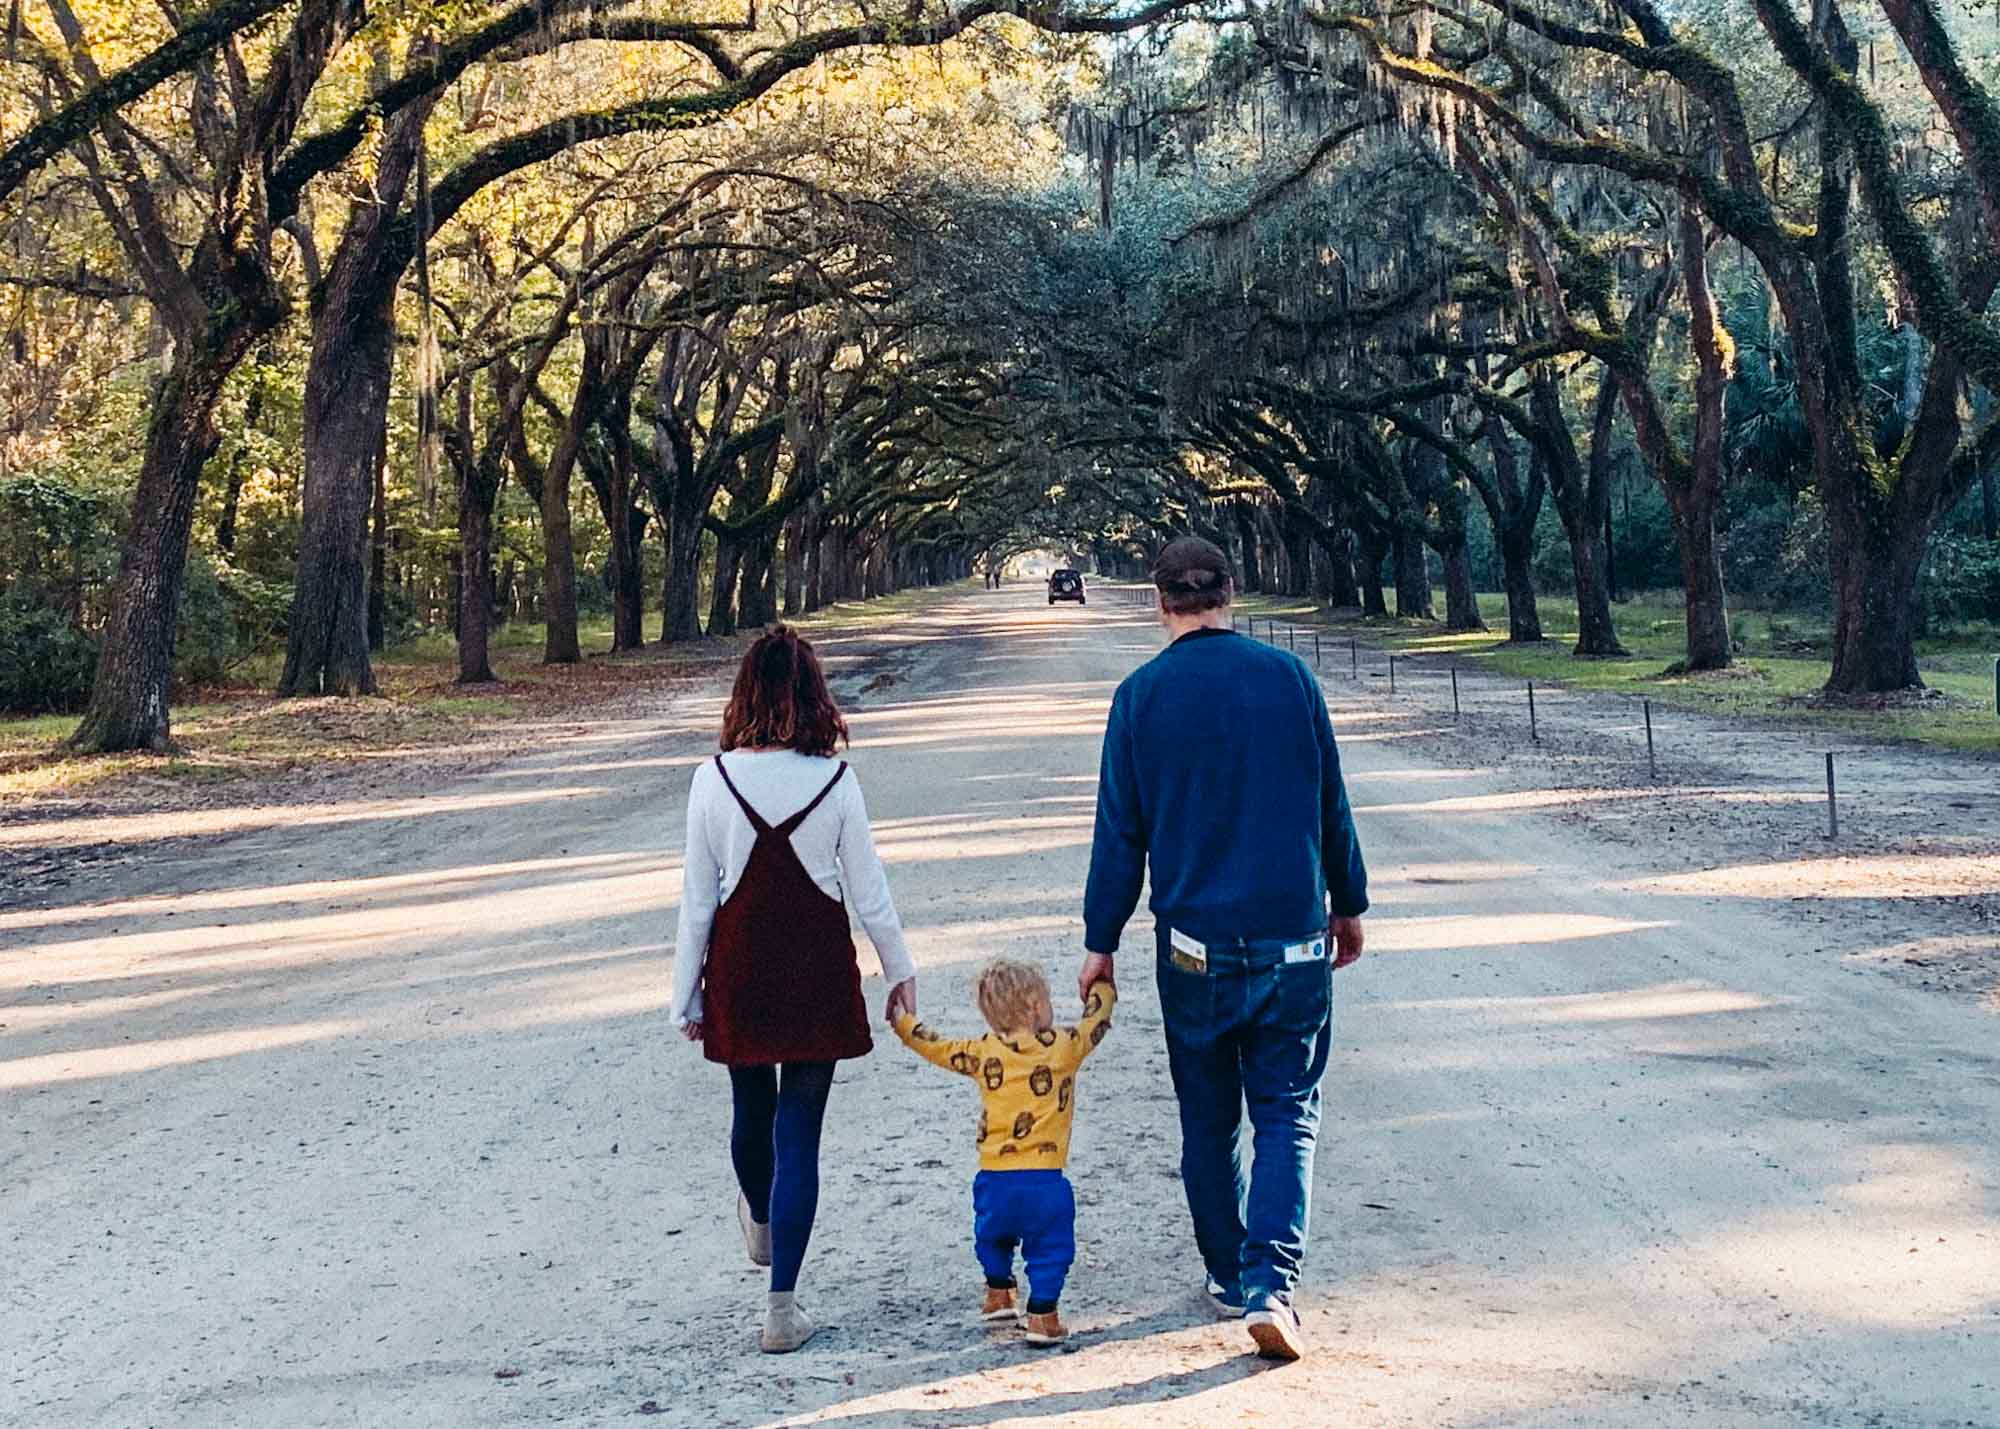 Things to do in Savannah with kids